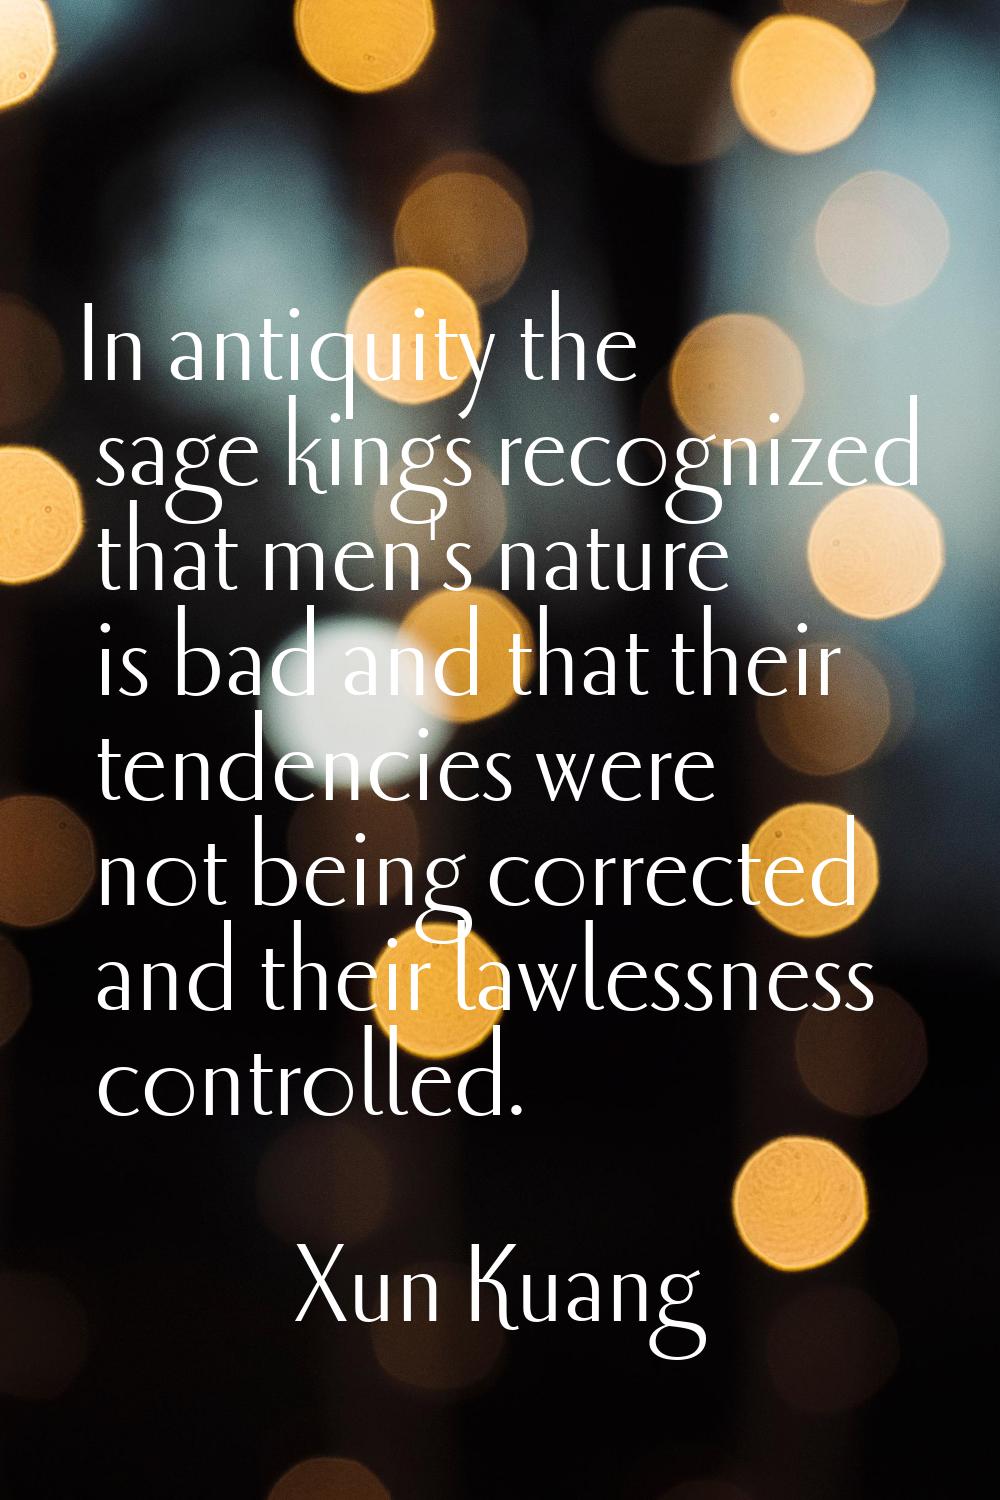 In antiquity the sage kings recognized that men's nature is bad and that their tendencies were not 